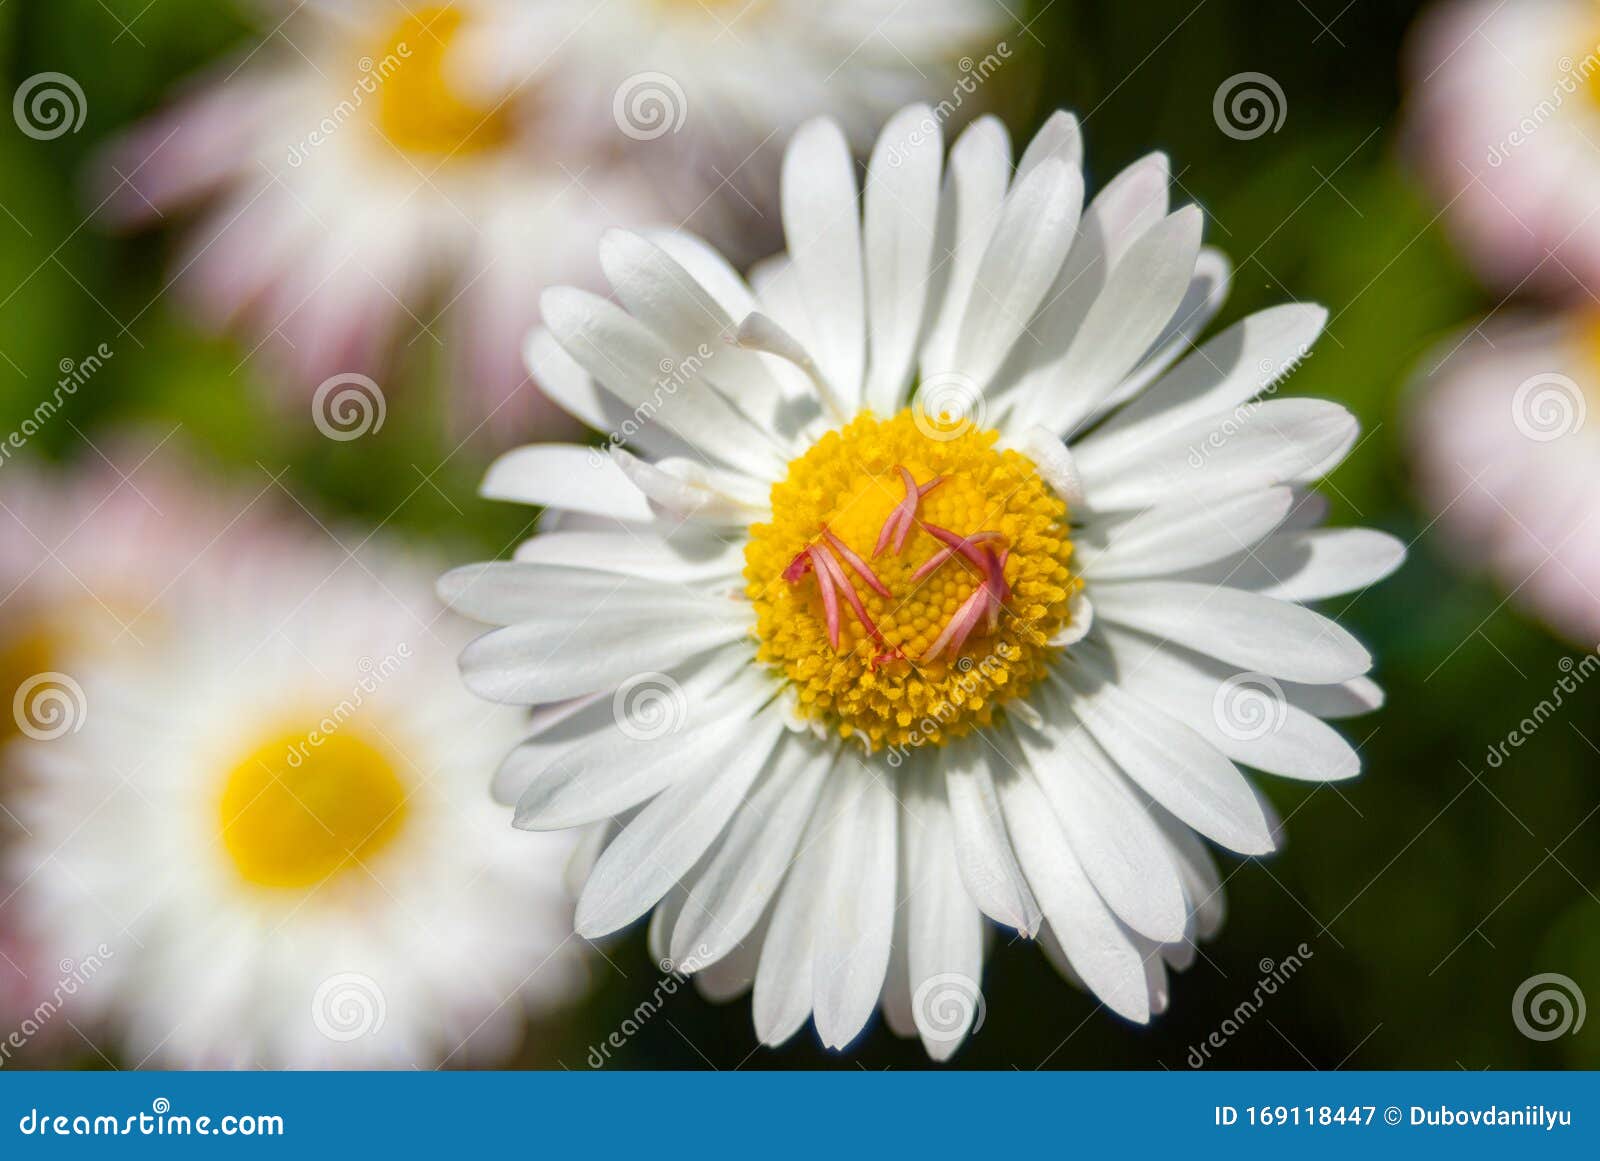 White Daisy Flower on a Sunny Bright Spring Day Stock Image - Image of ...